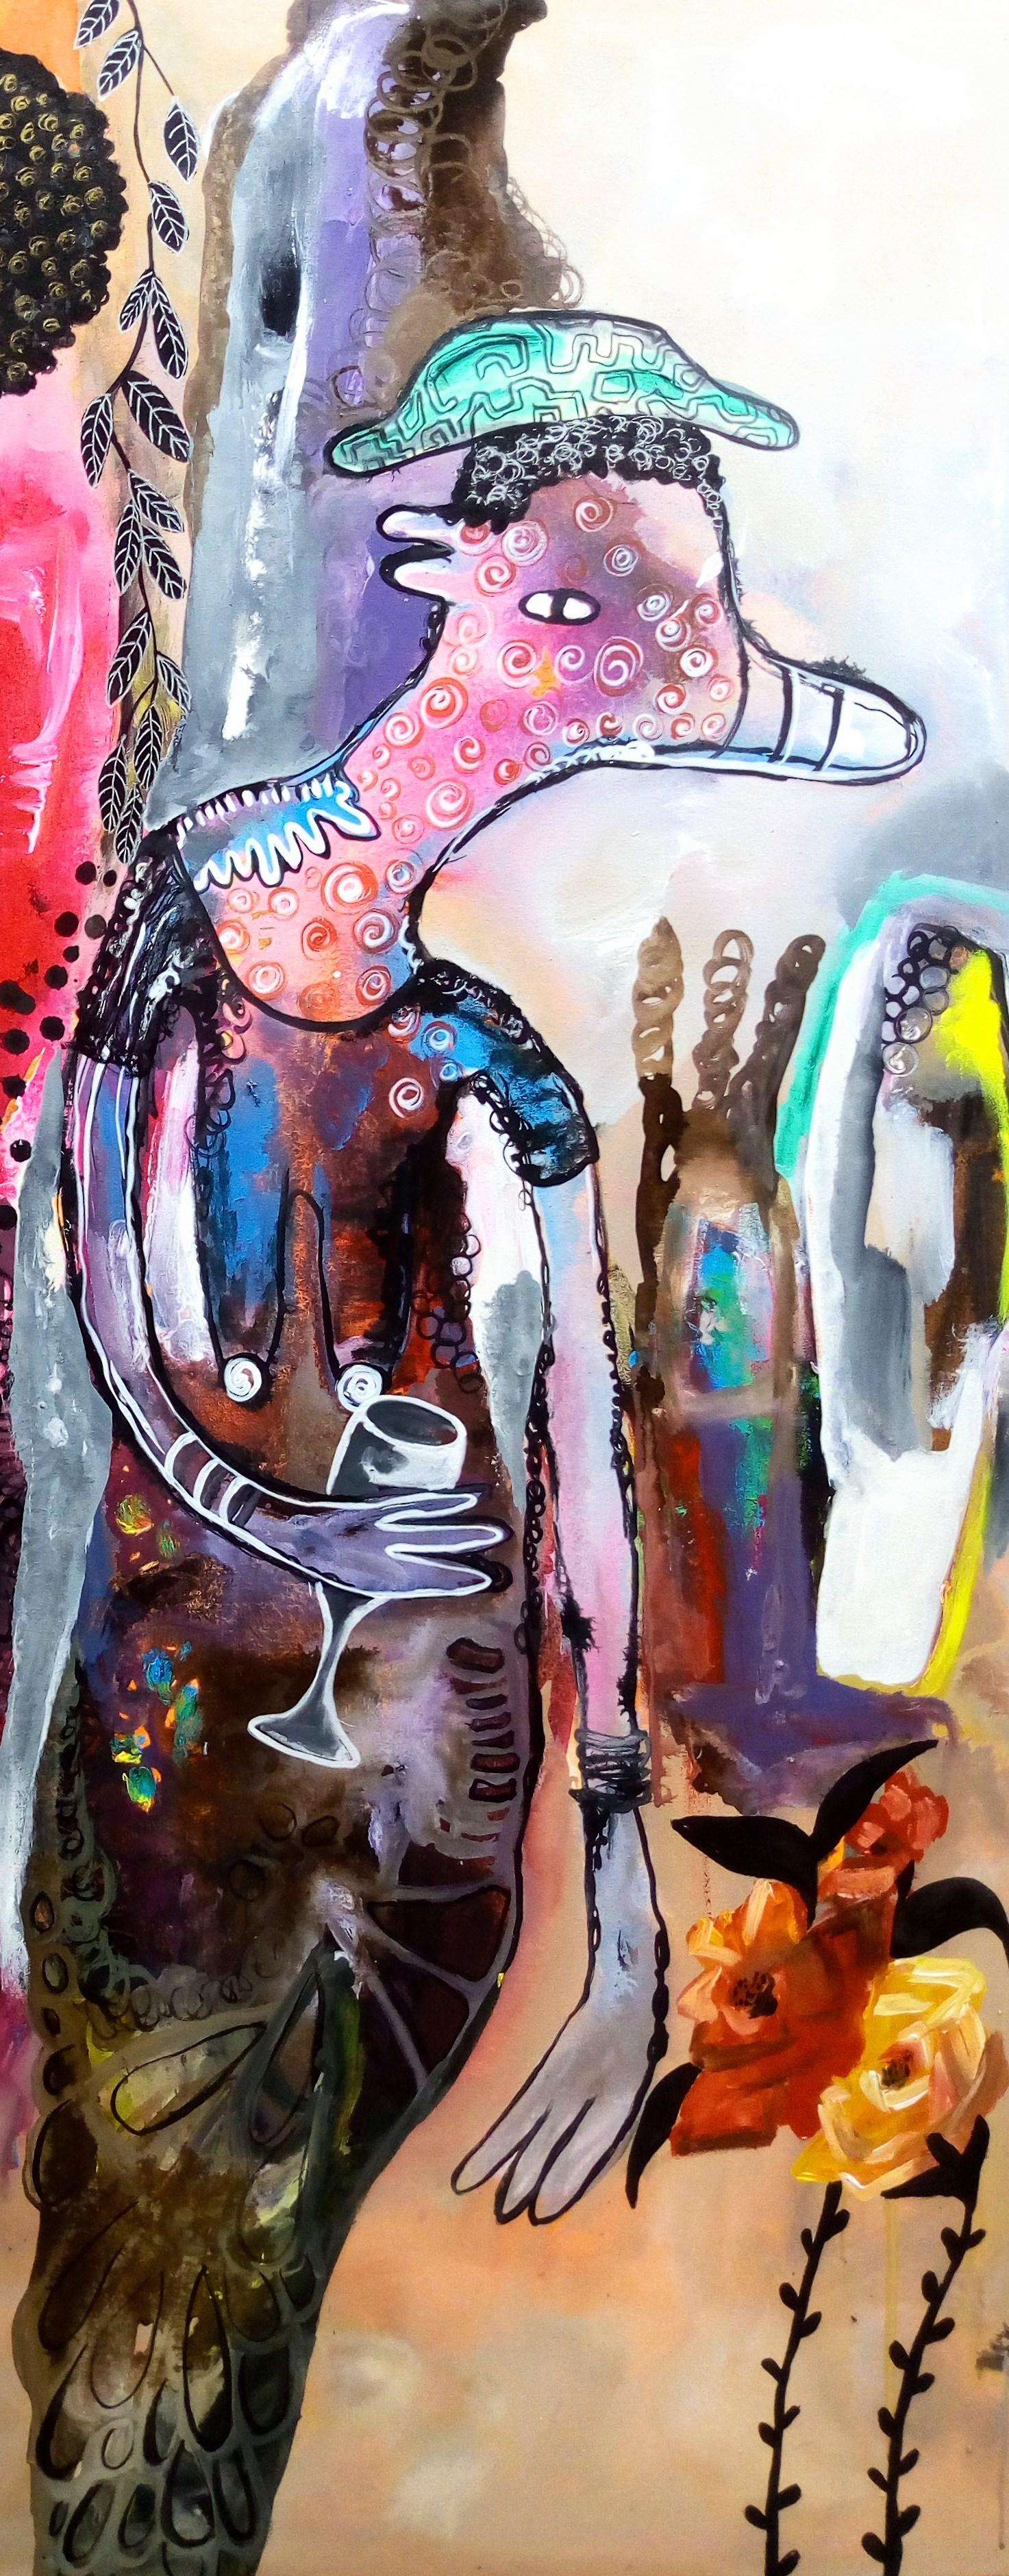 Acrylic paint on canvas
2019
Signed 
Unique work

The world of William Bakaïmo is a great dreamlike bestiary where humans are not humans, where animals are animals no more. In this strange ark of Noah, the imagination and the dream carve themselves